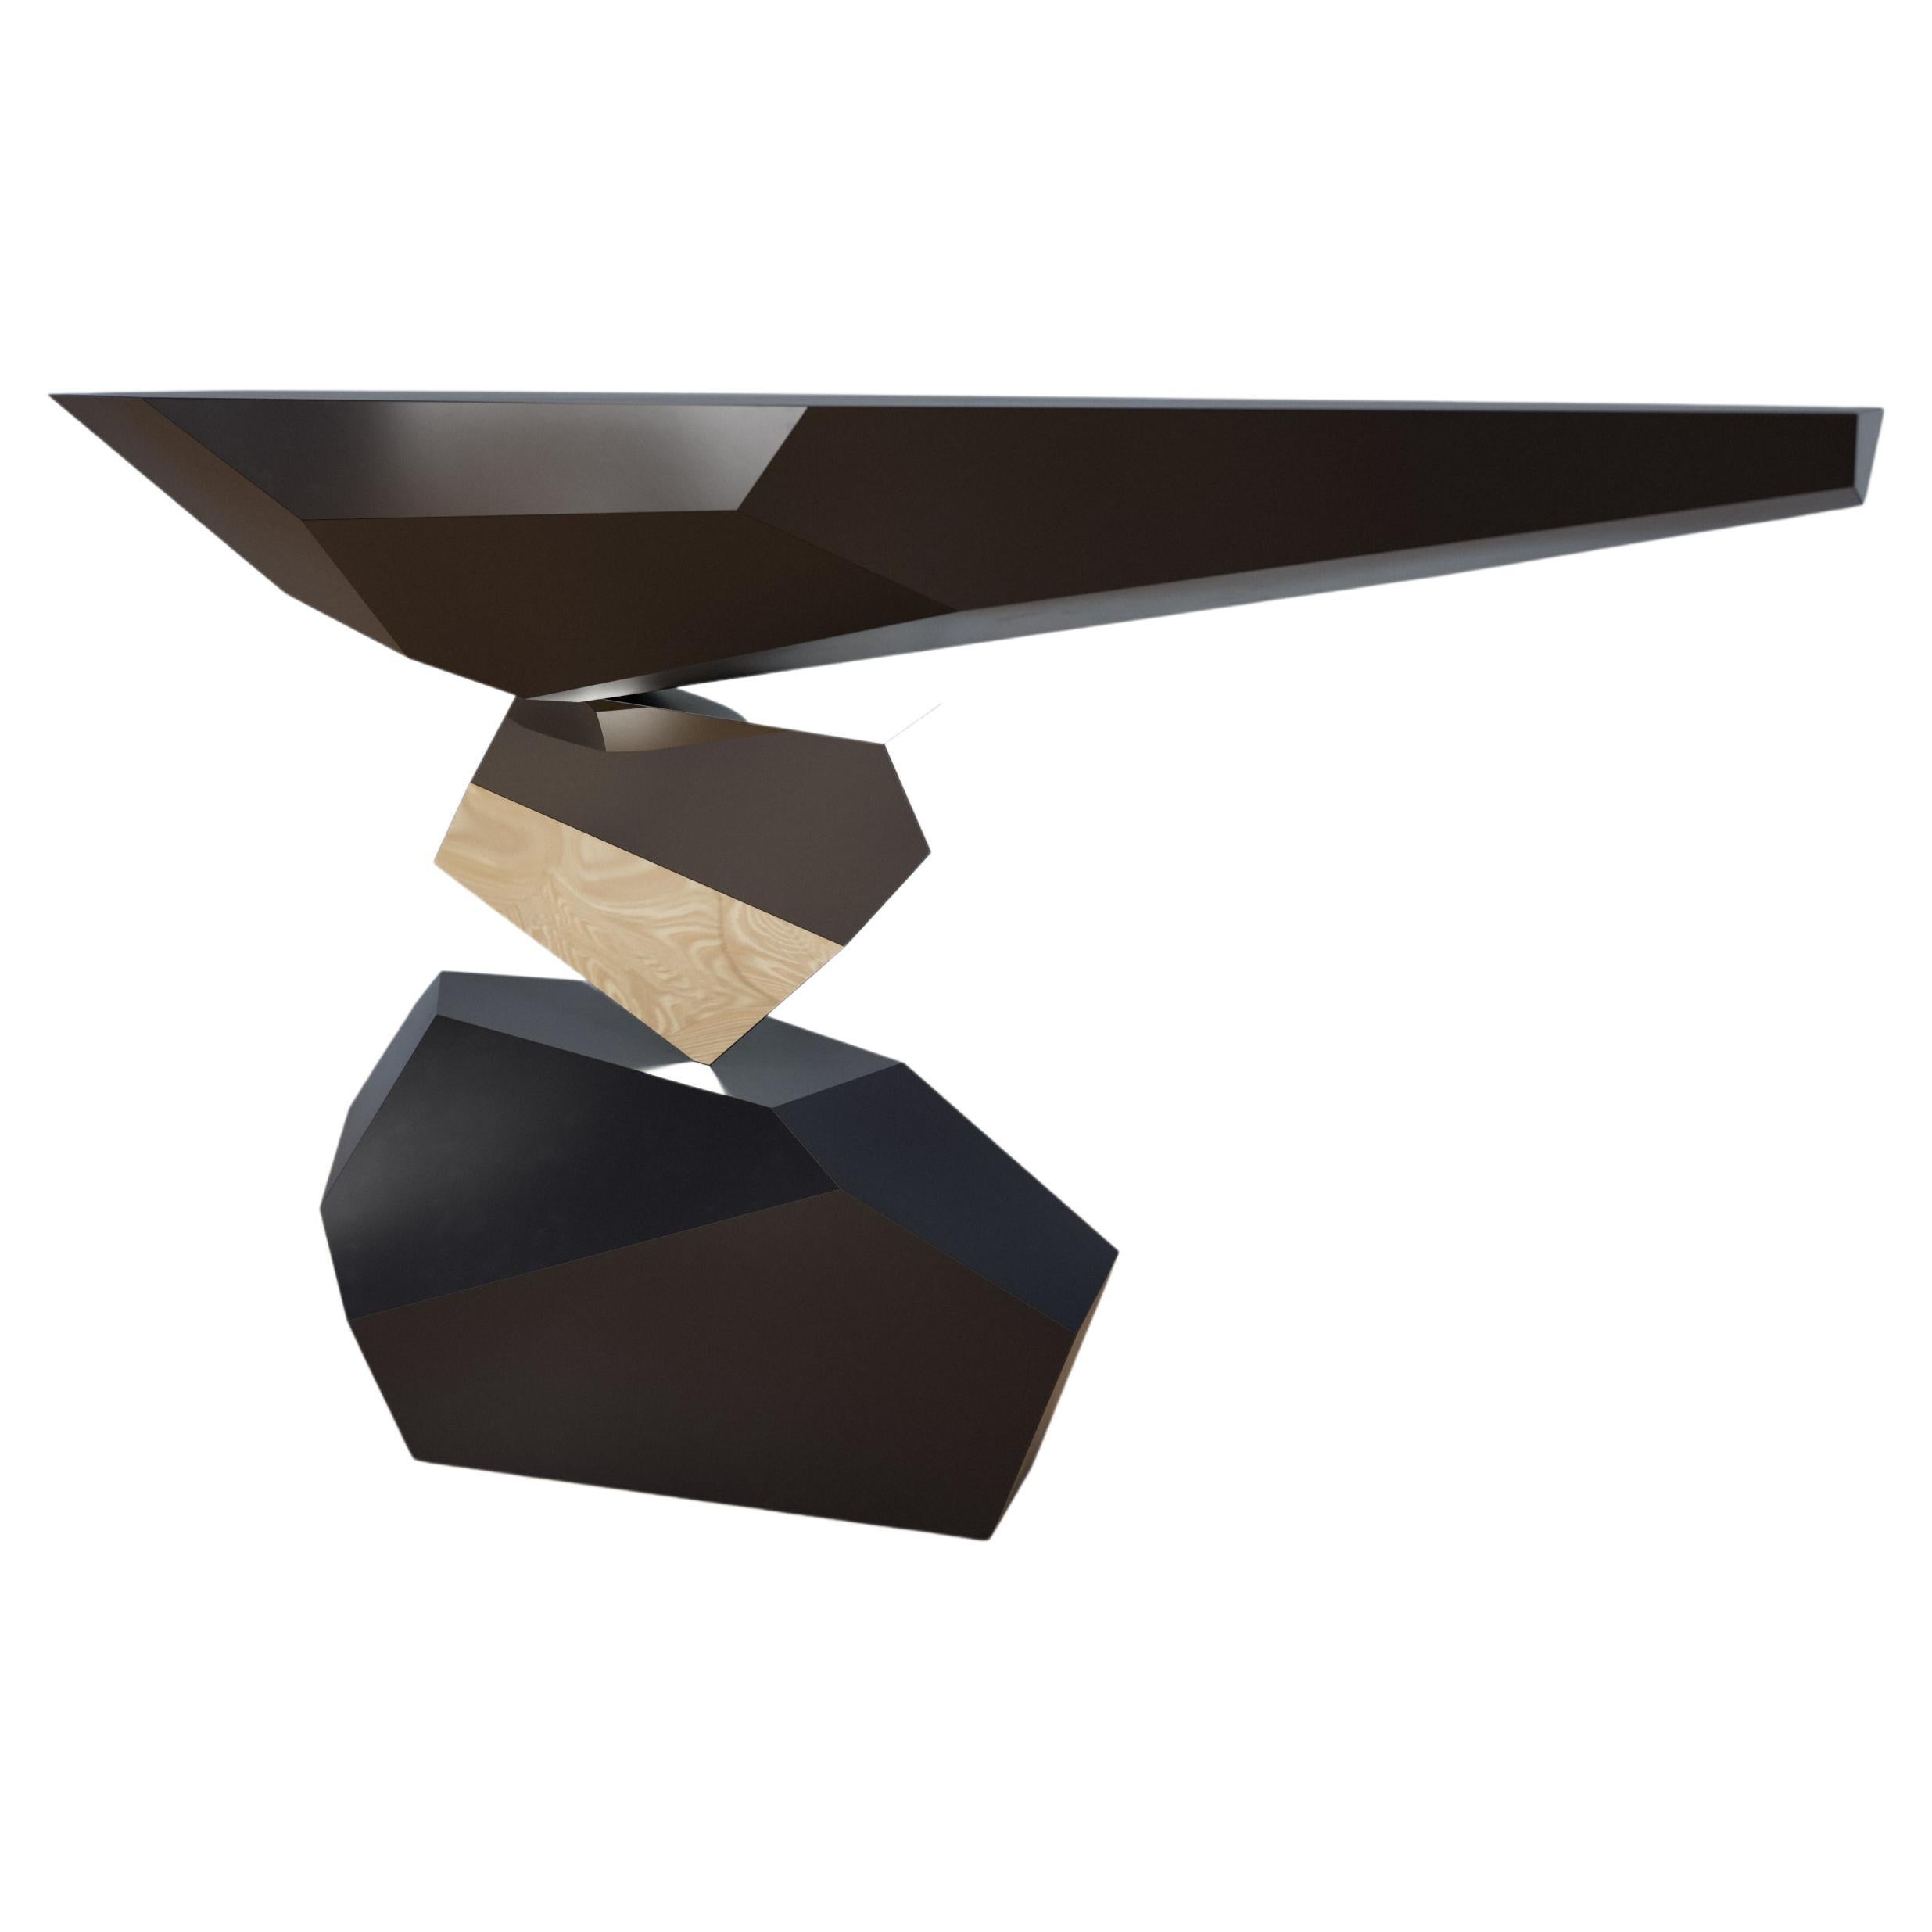 British Modern Sculptural Console Table in Polished Stainless Steel For Sale